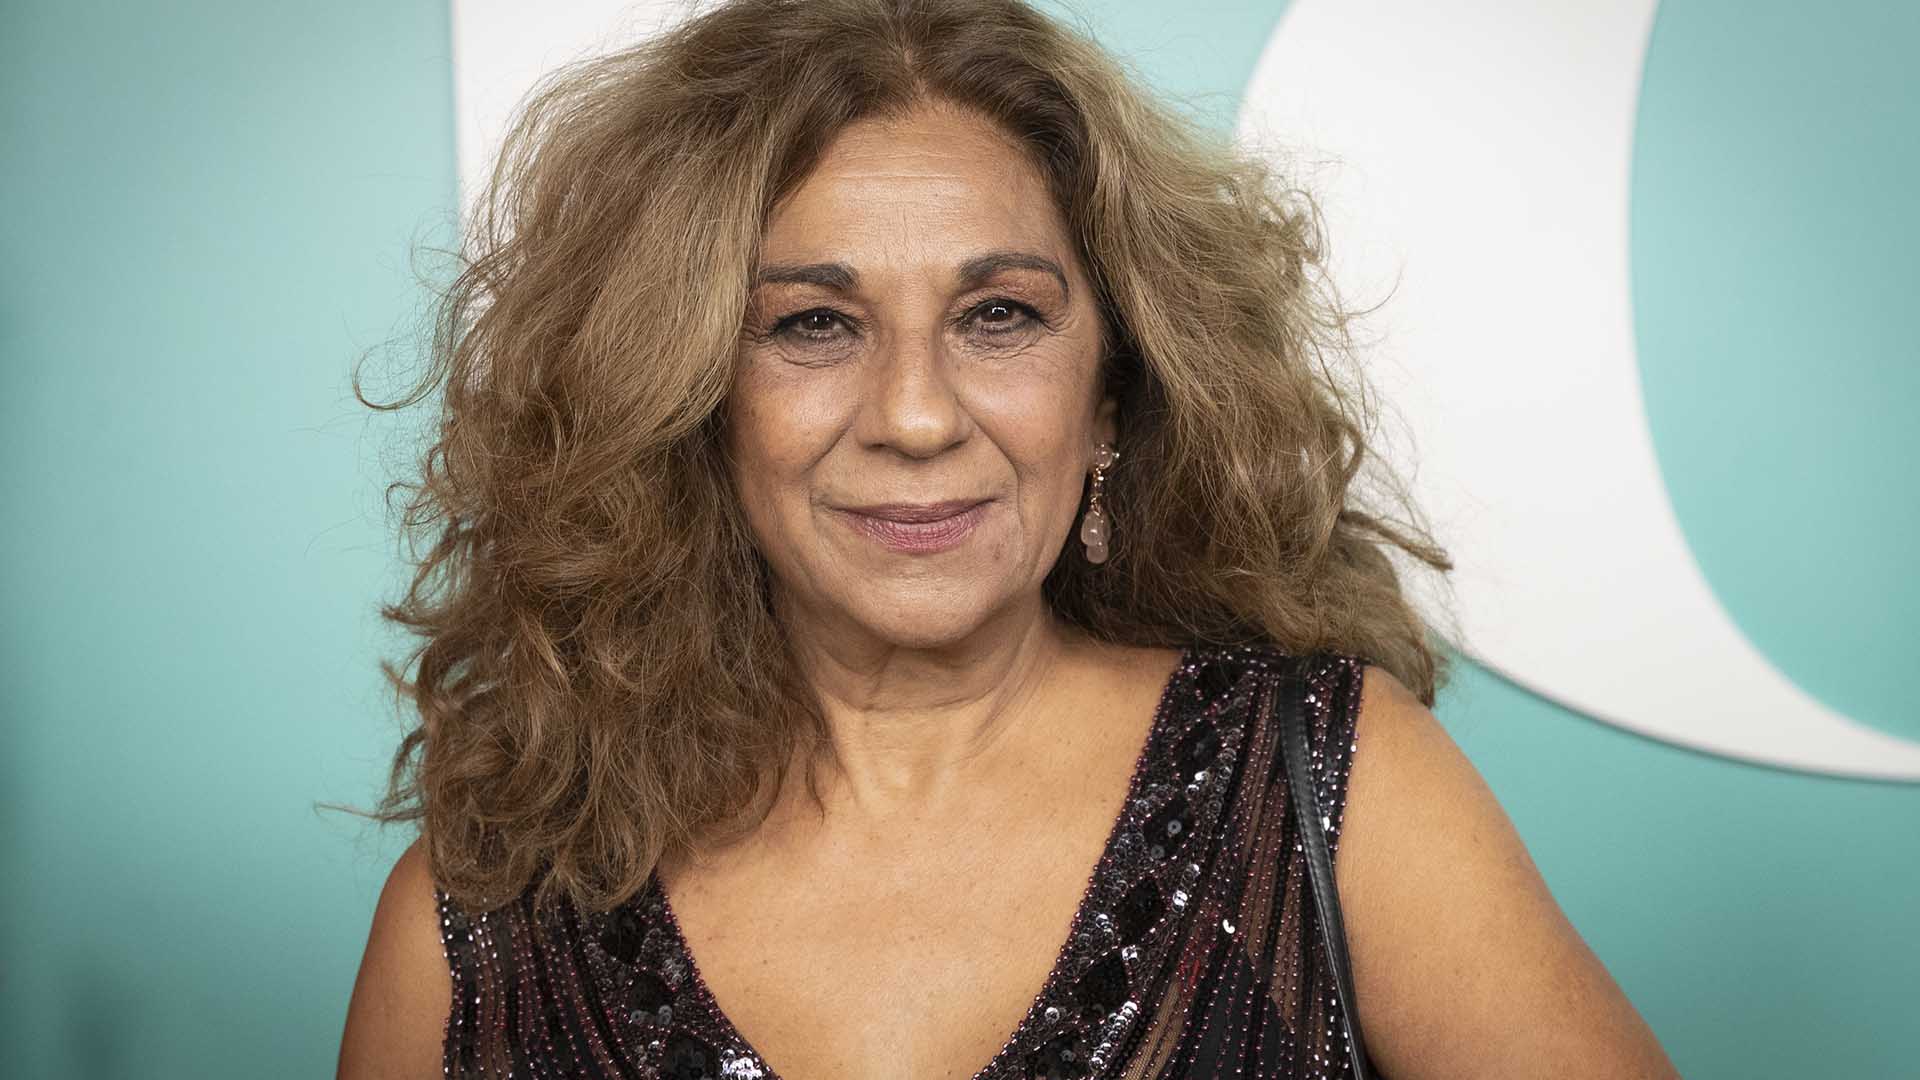 Singer Lolita Flores at photocall for tv show Lola in Madrid on  Wednesday, 27 October 2021.